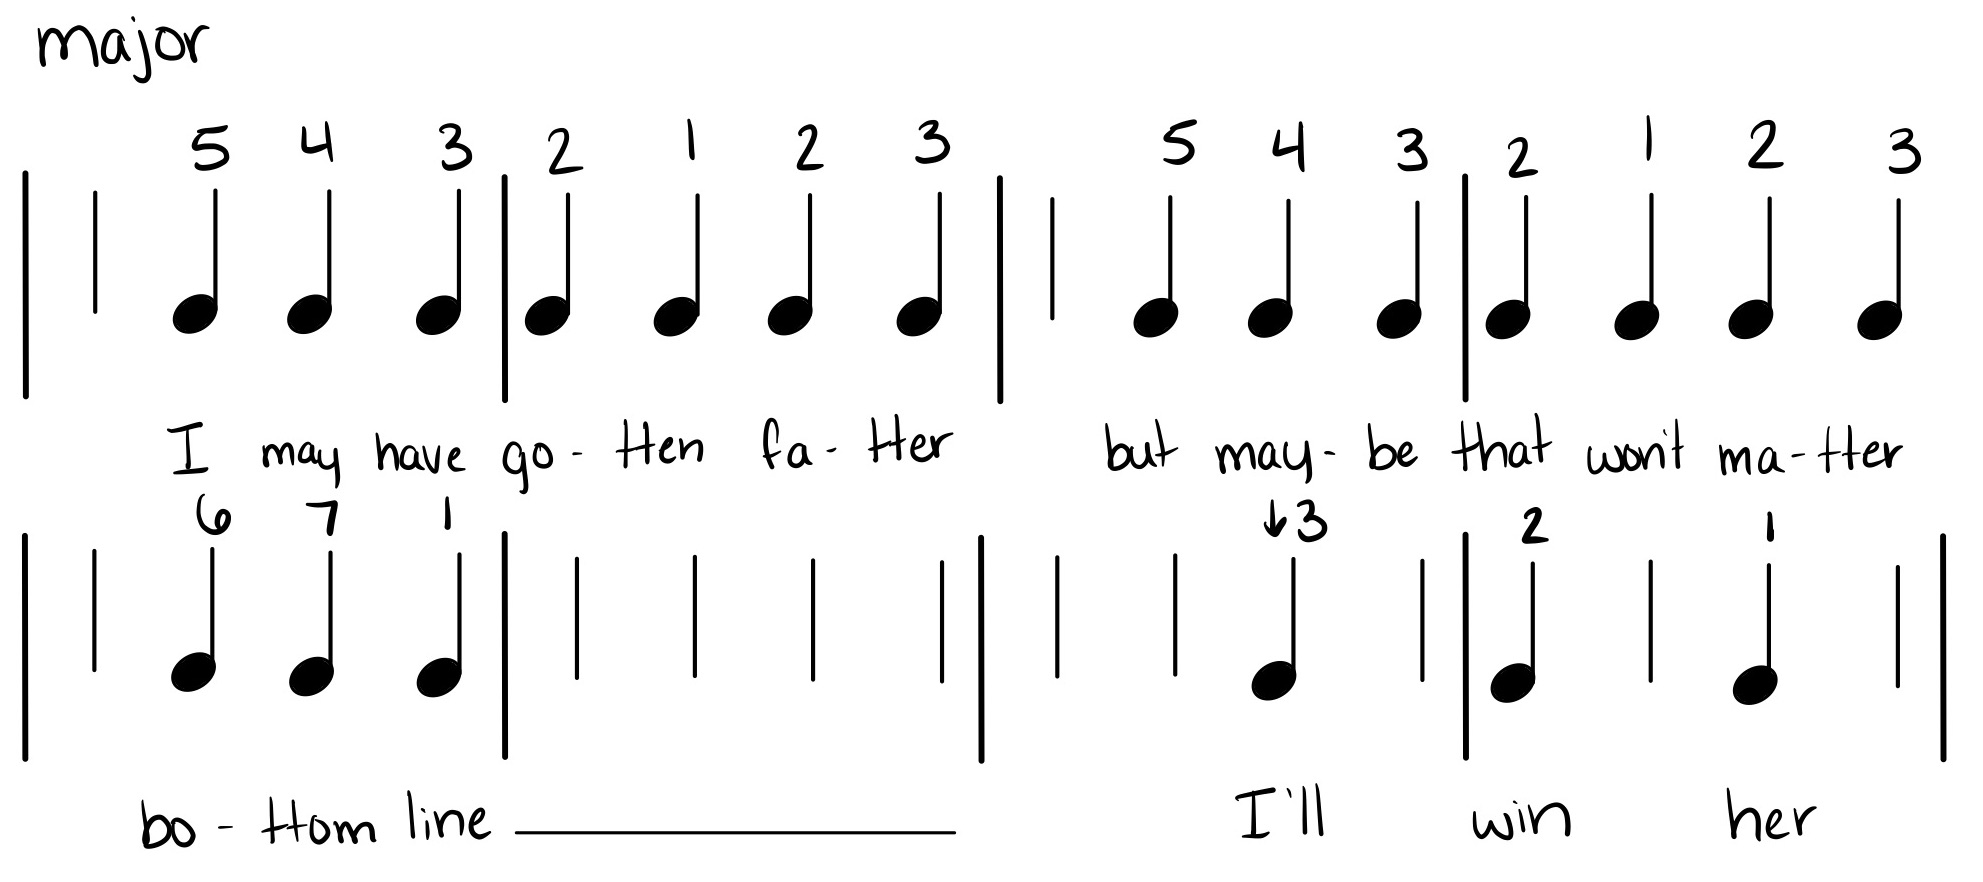 Pitch and rhythm “notehead shorthand” for 0:08–0:16 of the melody of the song “We’ll Go From There.” The word “major” is written above to indicate a major key. Vertical barlines separate the measures. Each half-beat is represented by the stem of a quarter note. Each stem where a new note sounds is given a notehead. The scale-degree numbers representing the notes are written above the stems with noteheads. The lowered scale-degree 3 at the word “I’ll” is represented by a downward-facing arrow right before the number 3. The lyrics of the melody are written below the noteheads.